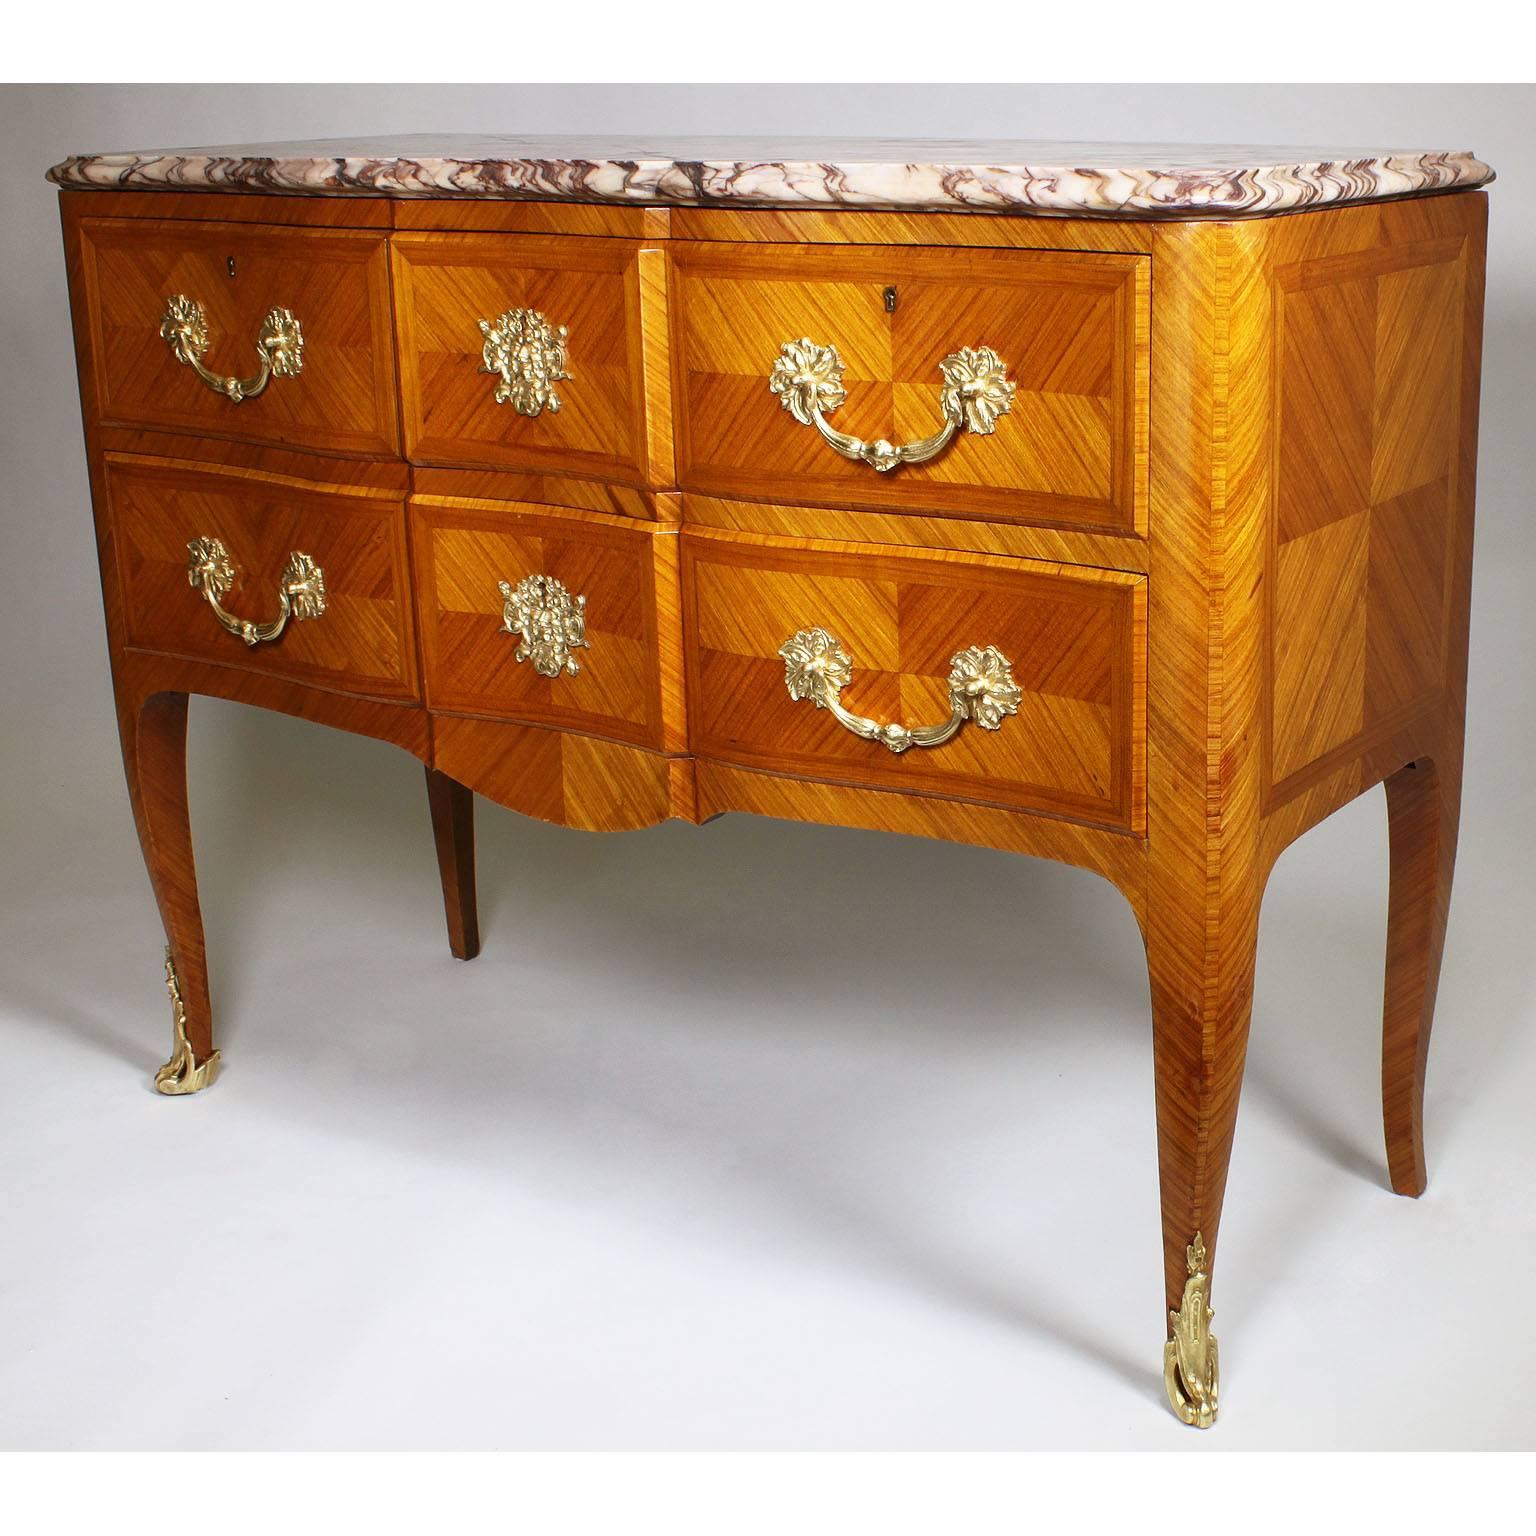 A French 19th-20th century Louis XV style blonde-stainwood and gilt bronze-mounted two-drawer commode with marble top, Paris, circa 1900.

Measures: Height 33 1/8 inches (84.1 cm)
Width 43 1/2 inches (110.5 cm)
Depth 18 inches (45.7 cm).

 